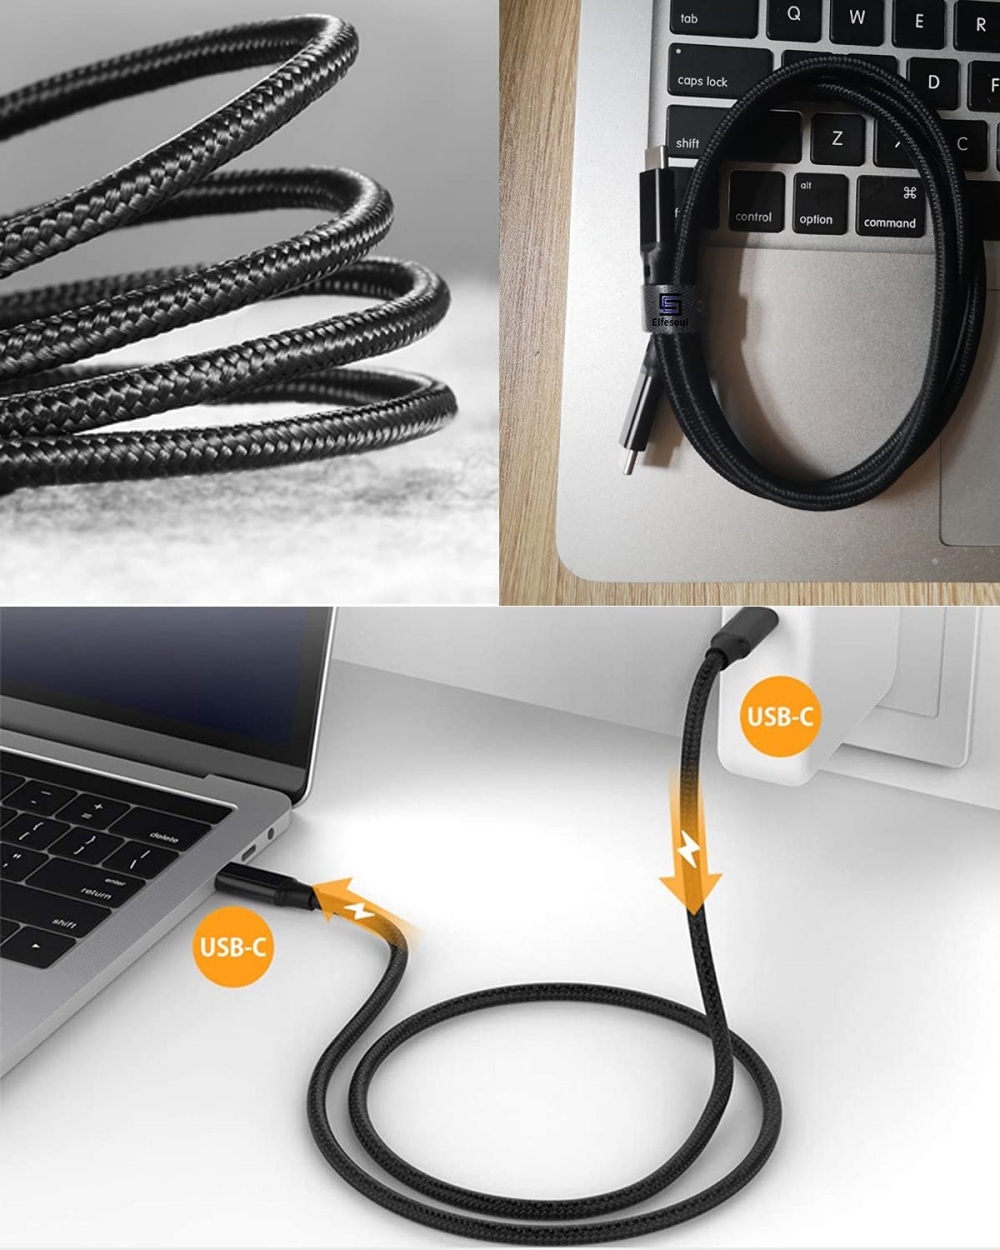 USB C 10Gbps USB 3.1 Gen 2 Cable